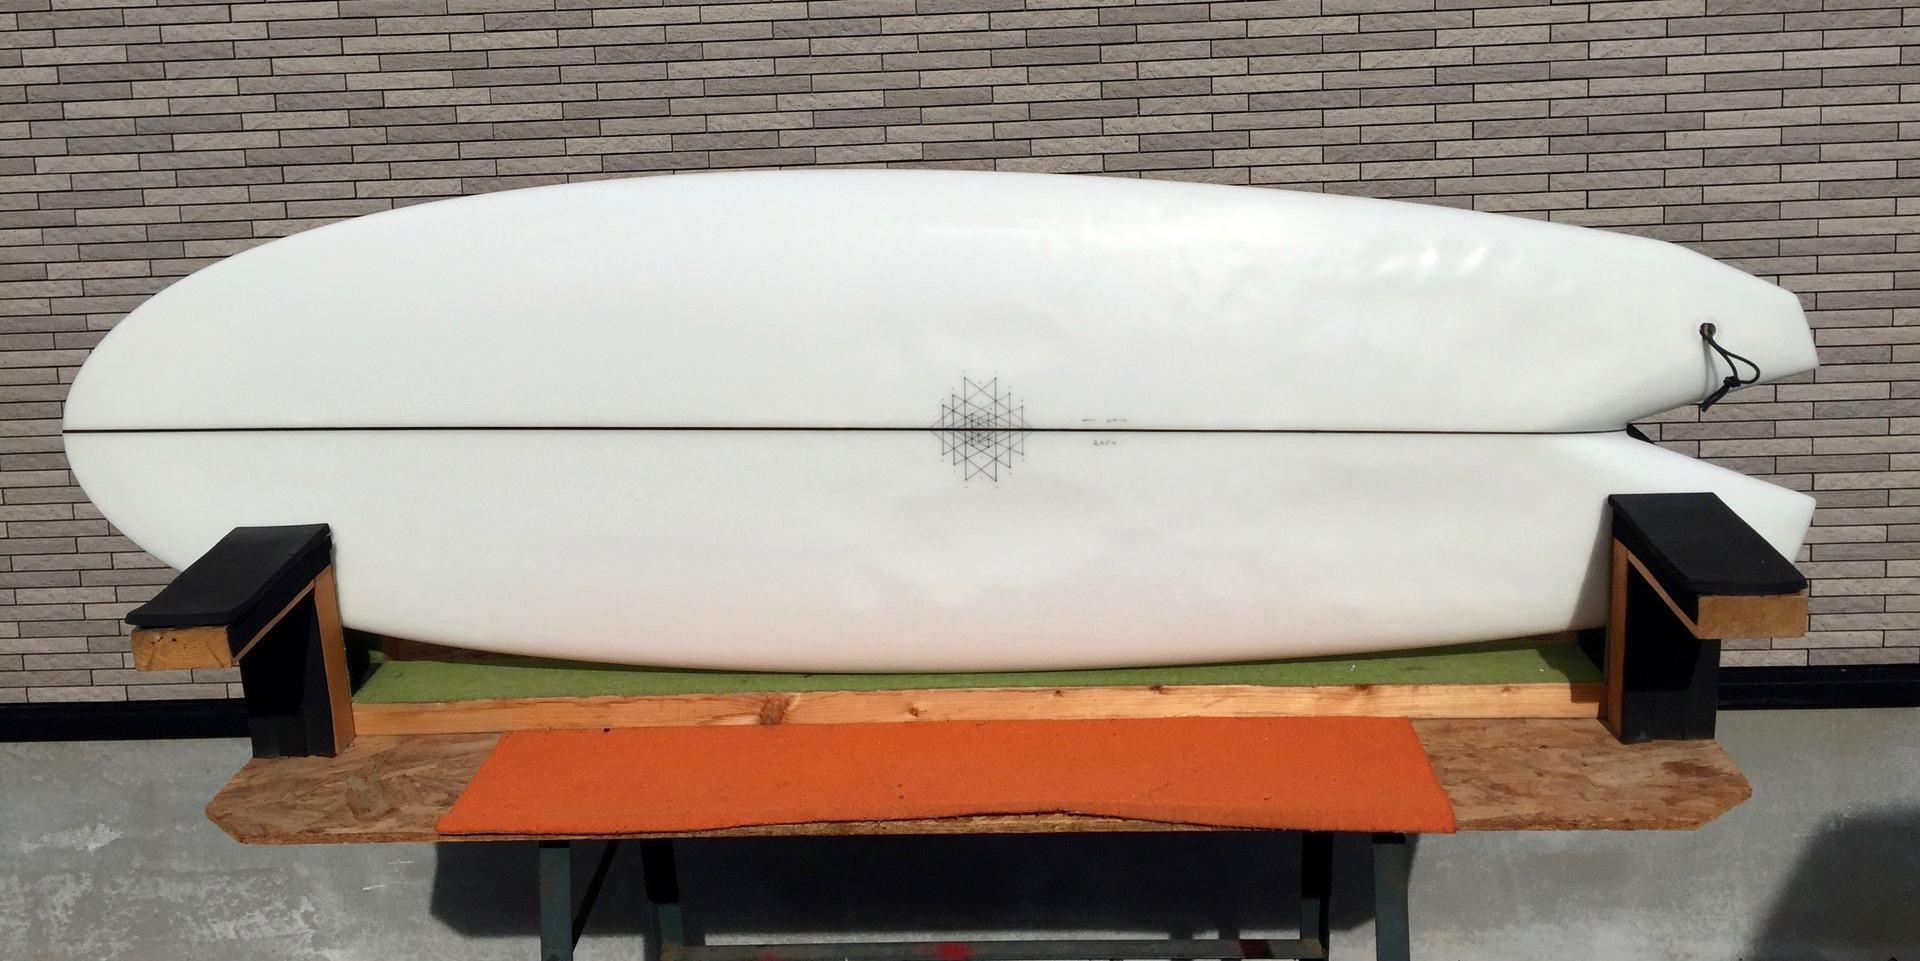 MANDRA ARC tail Swallow tail Quad 5'8 クリア: Used surfboards